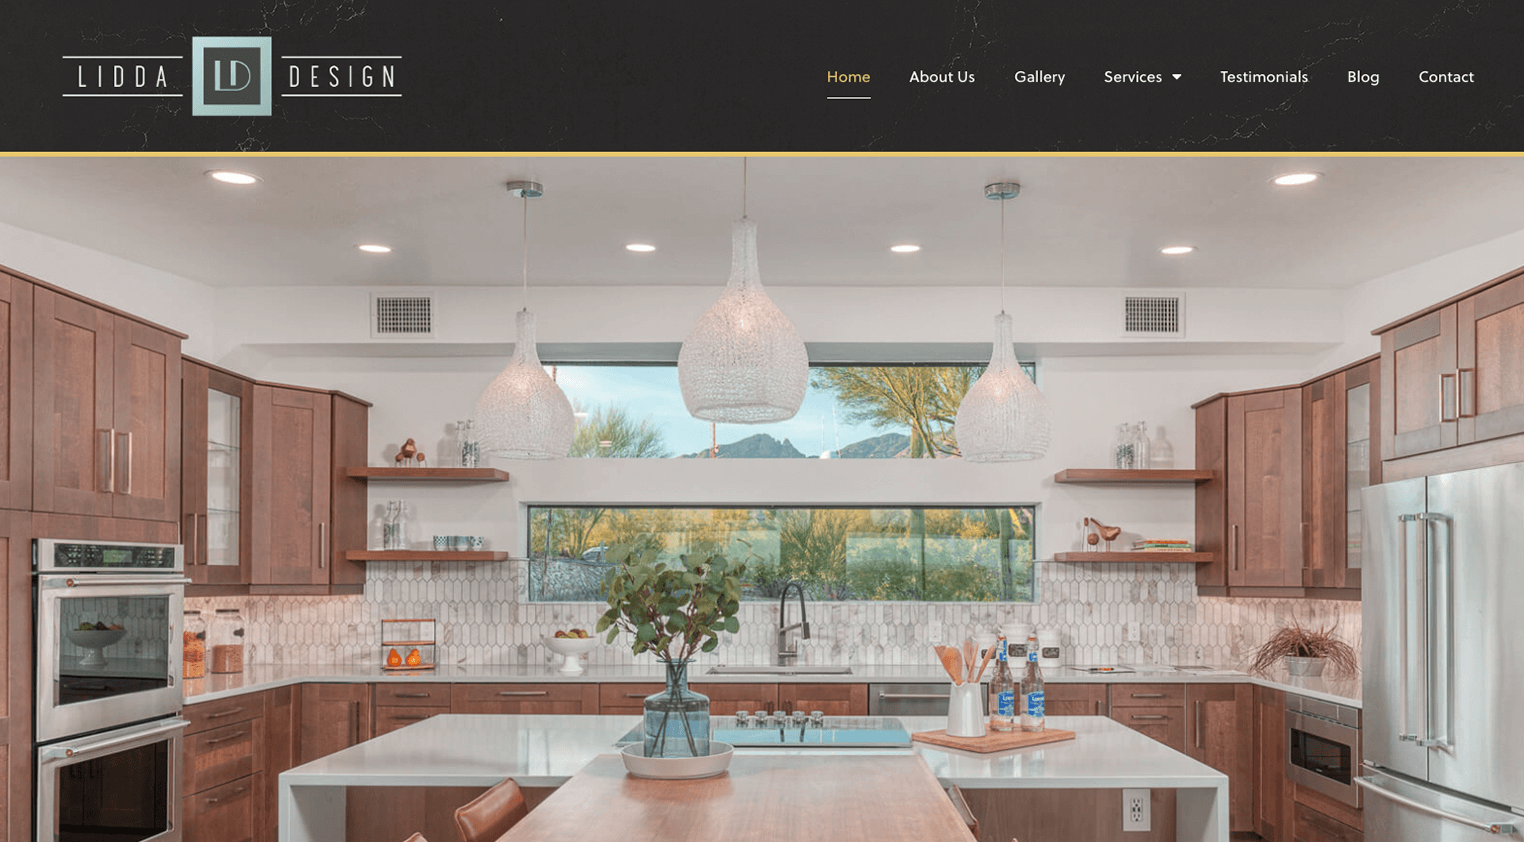 Professionally designed website by Anchor Wave for a home design company